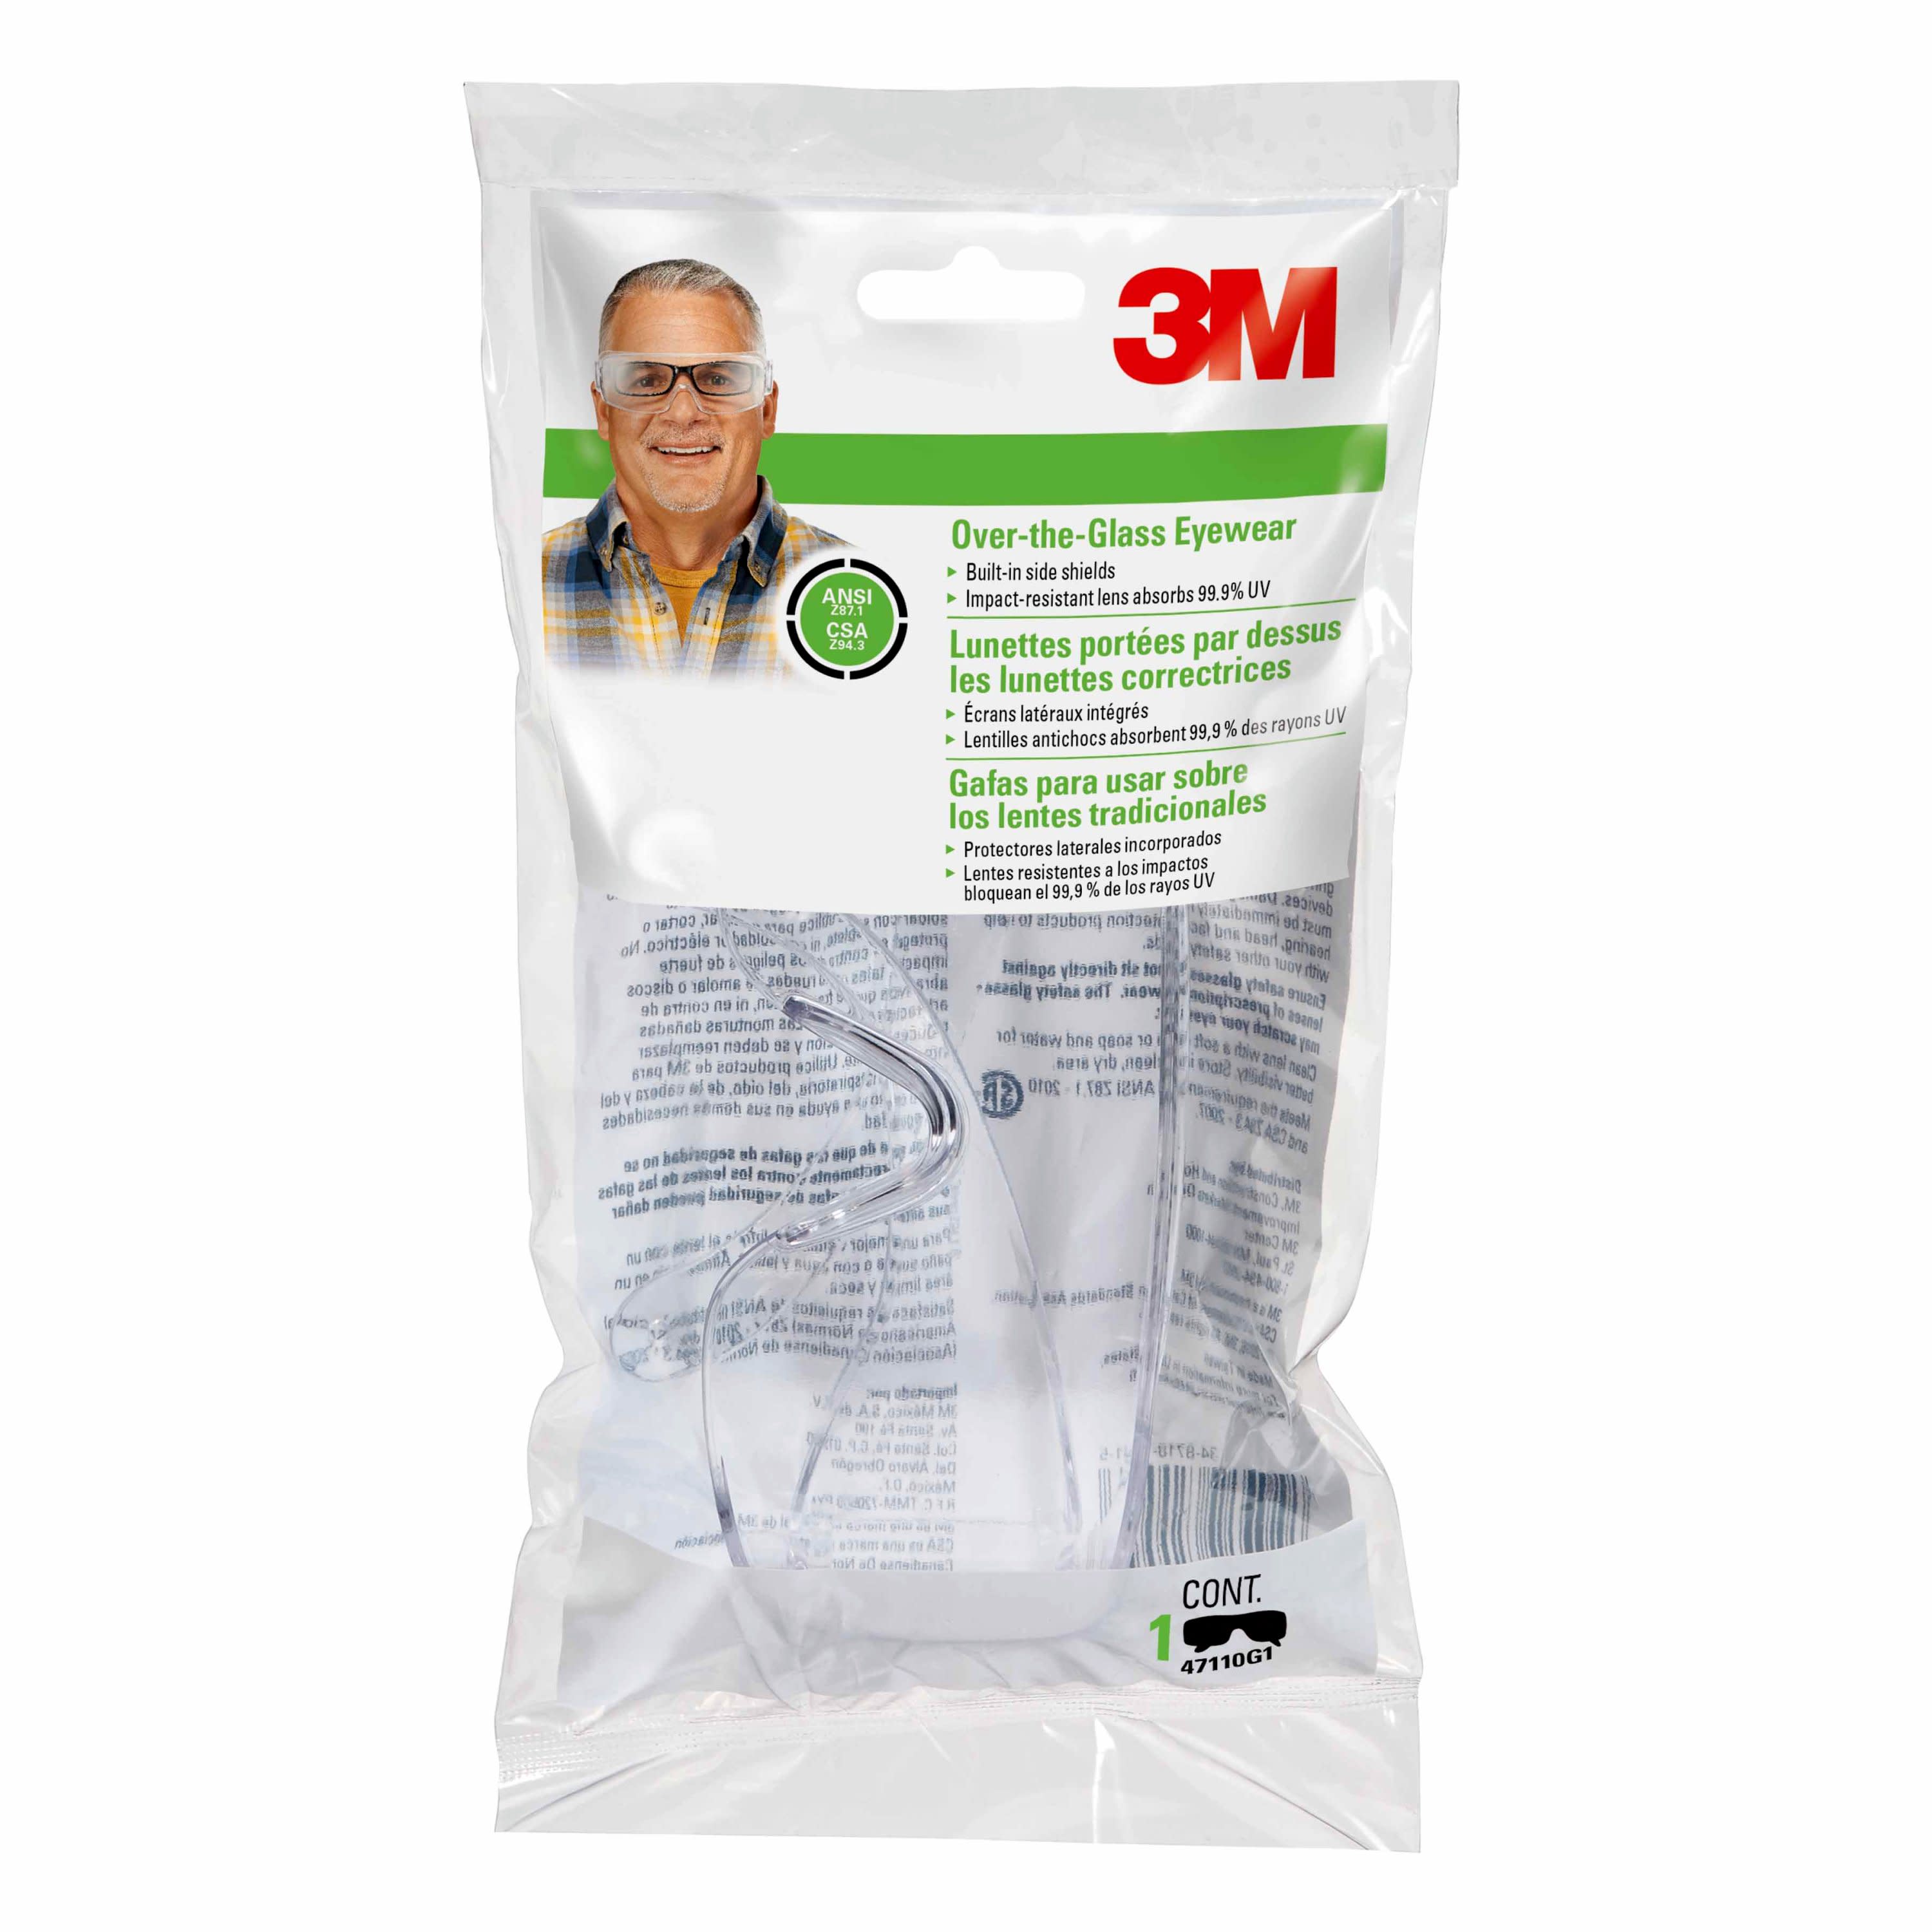 3M Over-the-Glass Clear Lens Eyewear Protection, Clear Frame - image 1 of 5